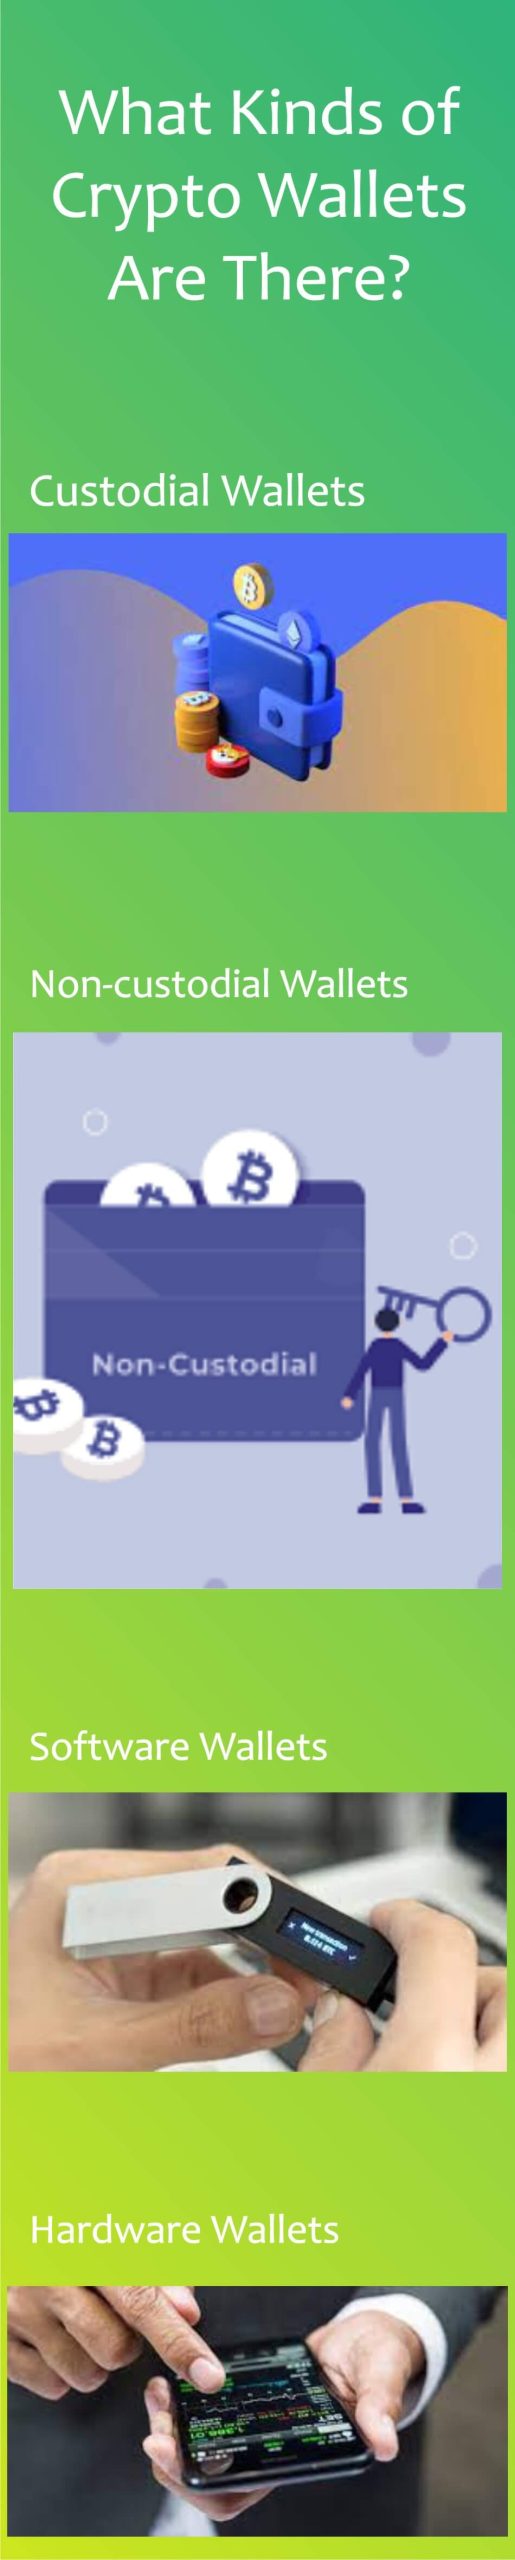 What Kinds of Crypto Wallets Are There